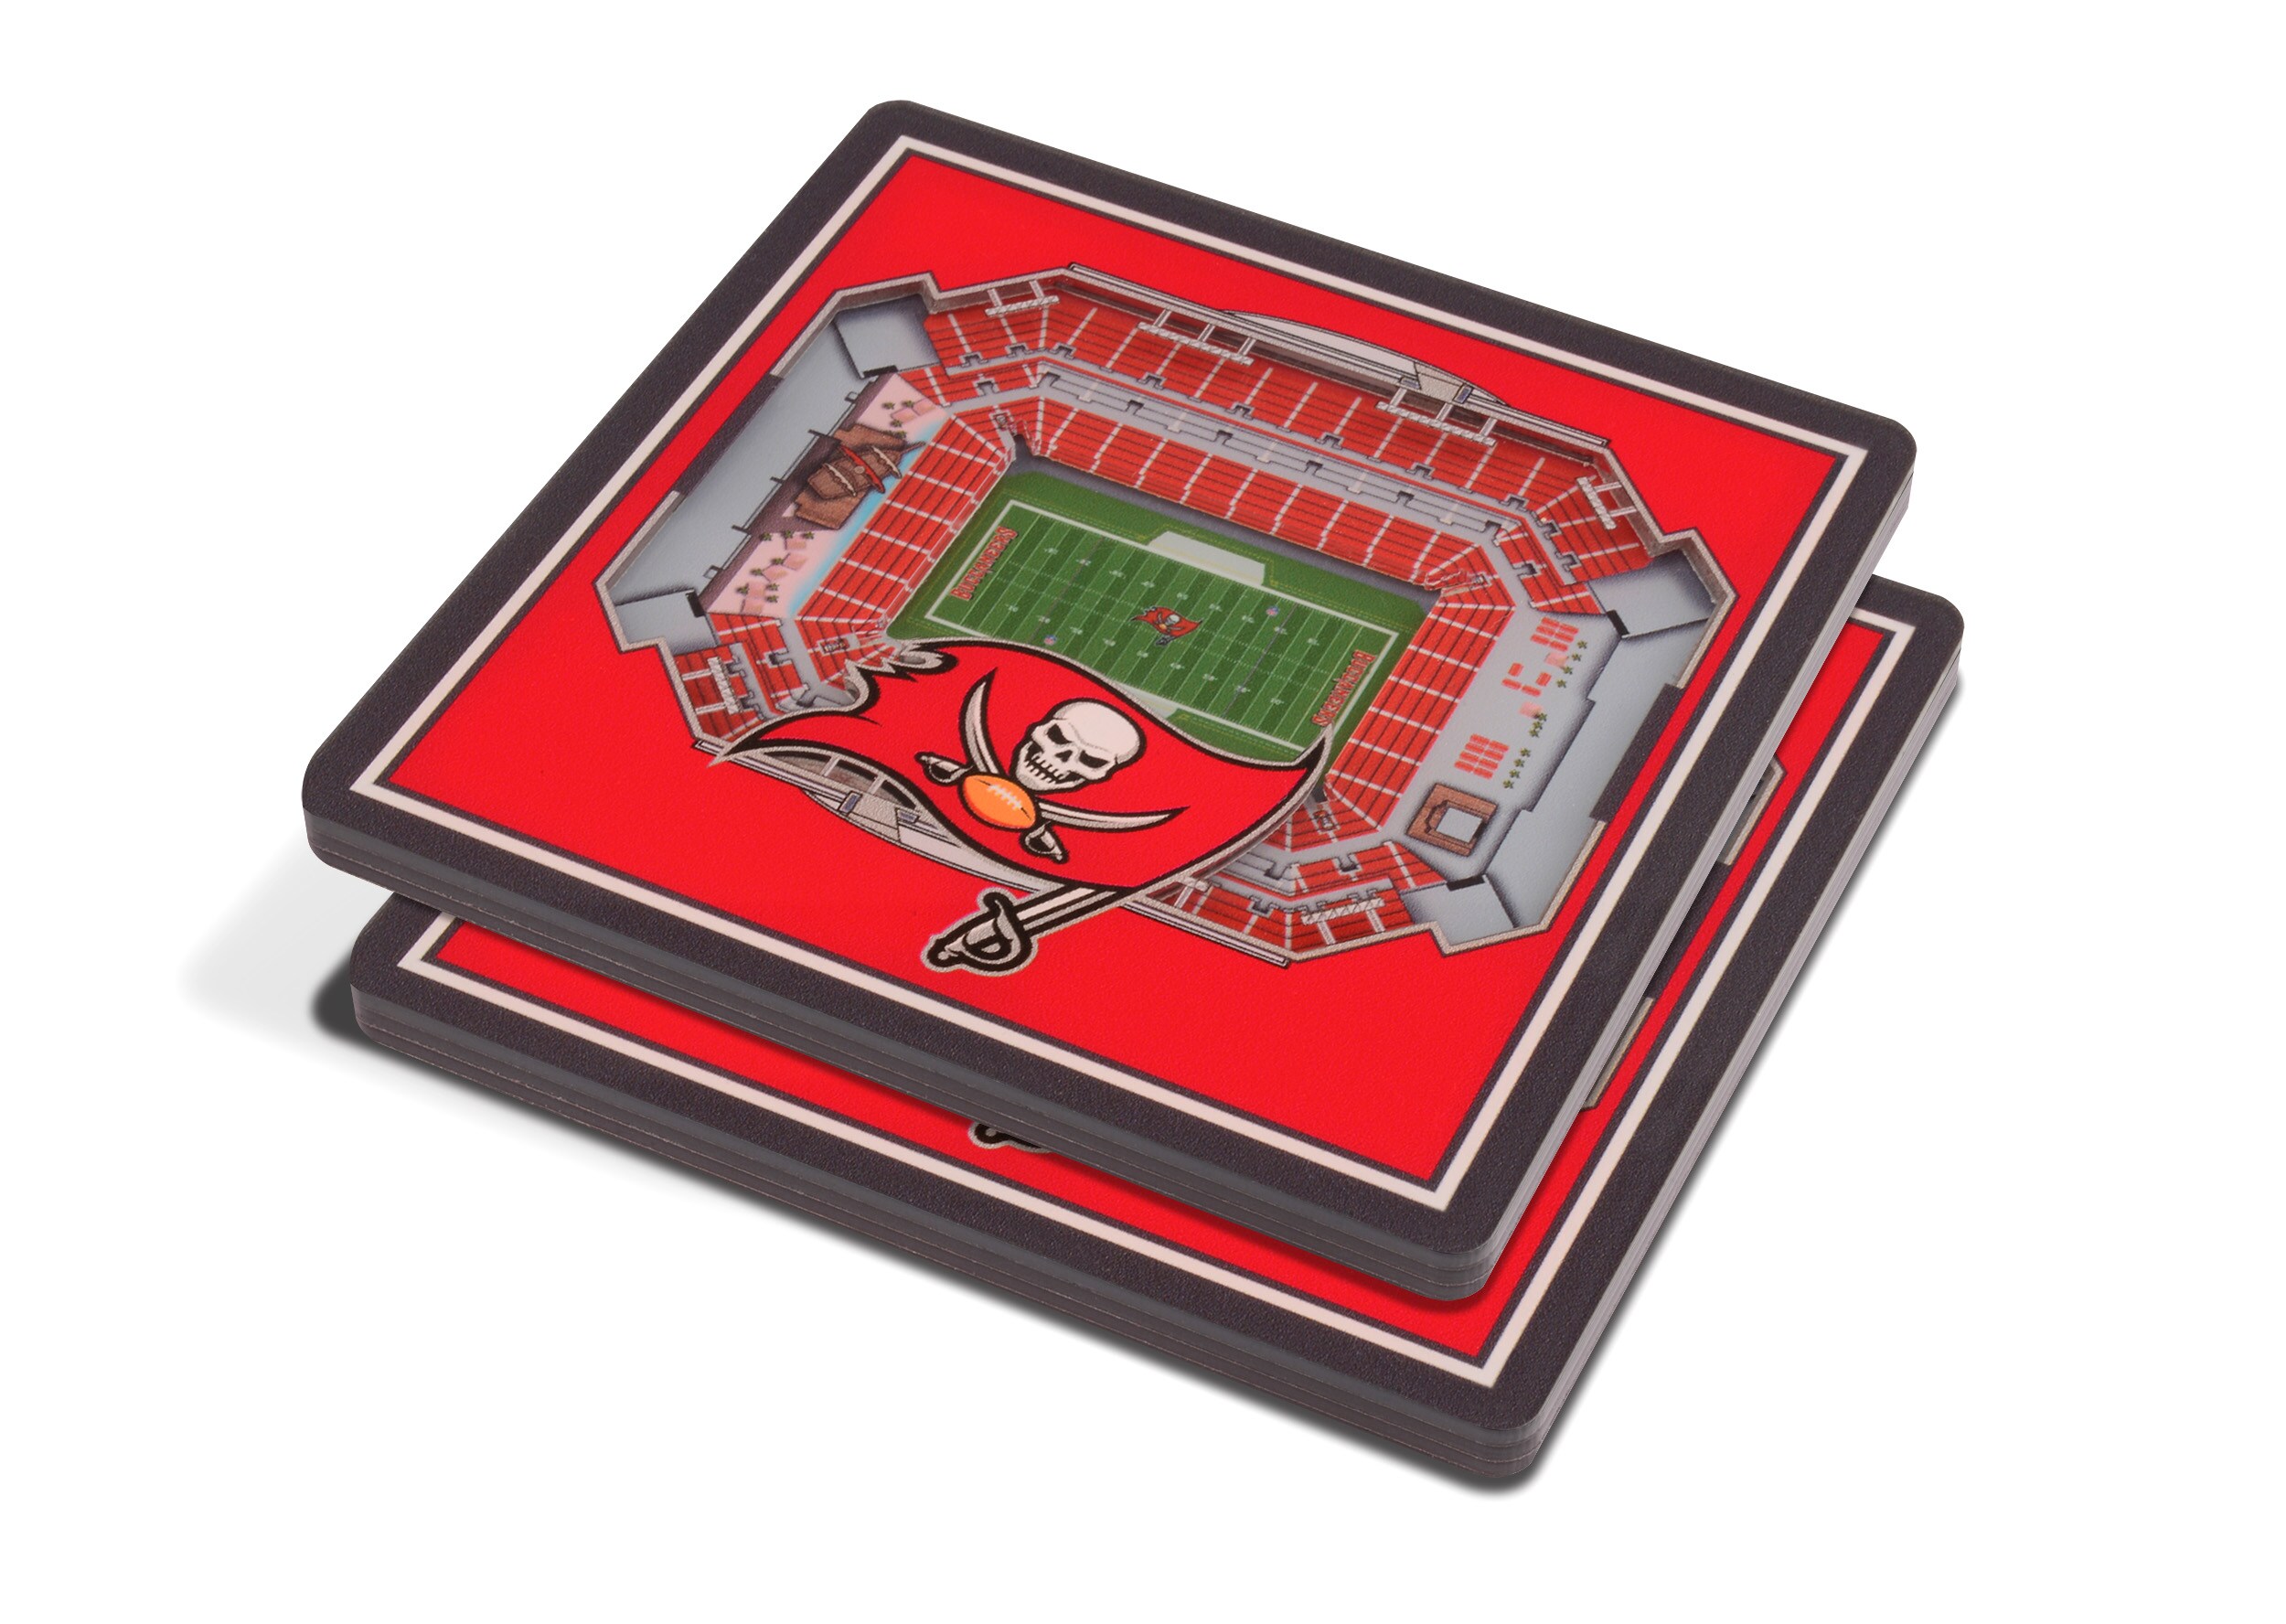 FANMATS Tampa Bay Buccaneers Super Bowl LV Champions Large Decal